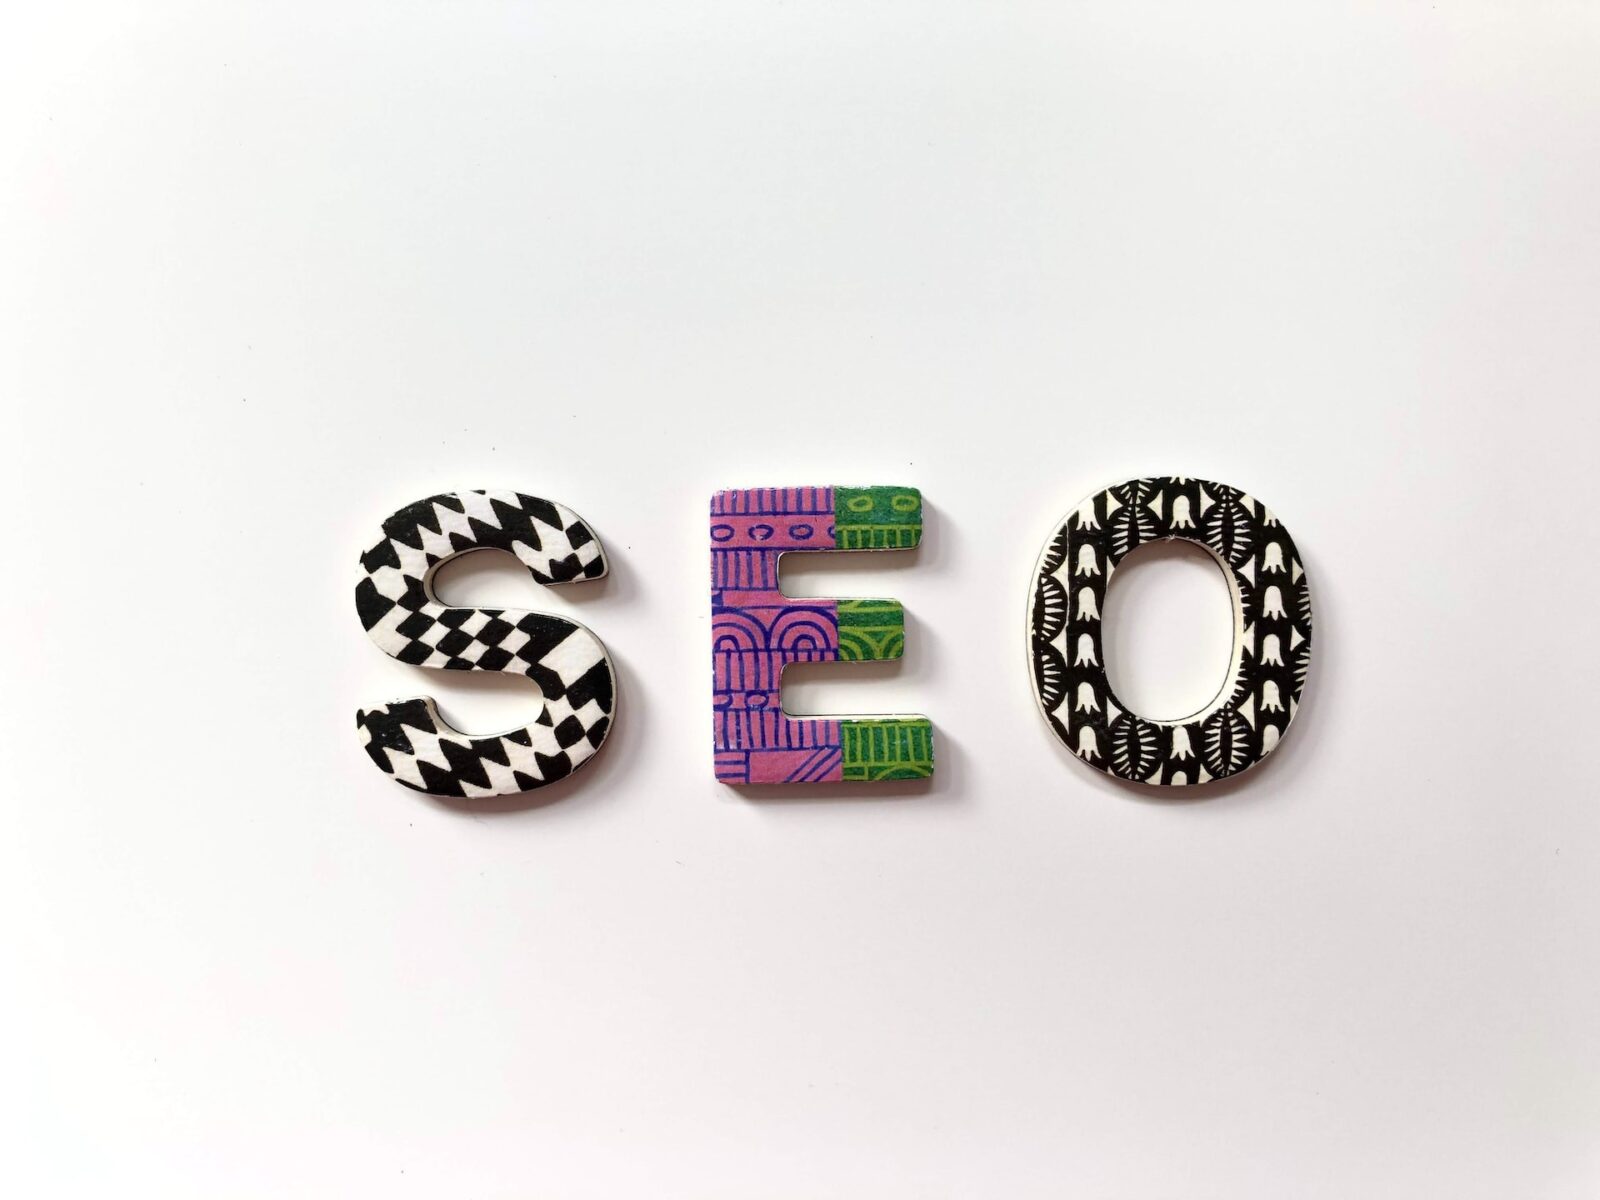 What SEO can do for you